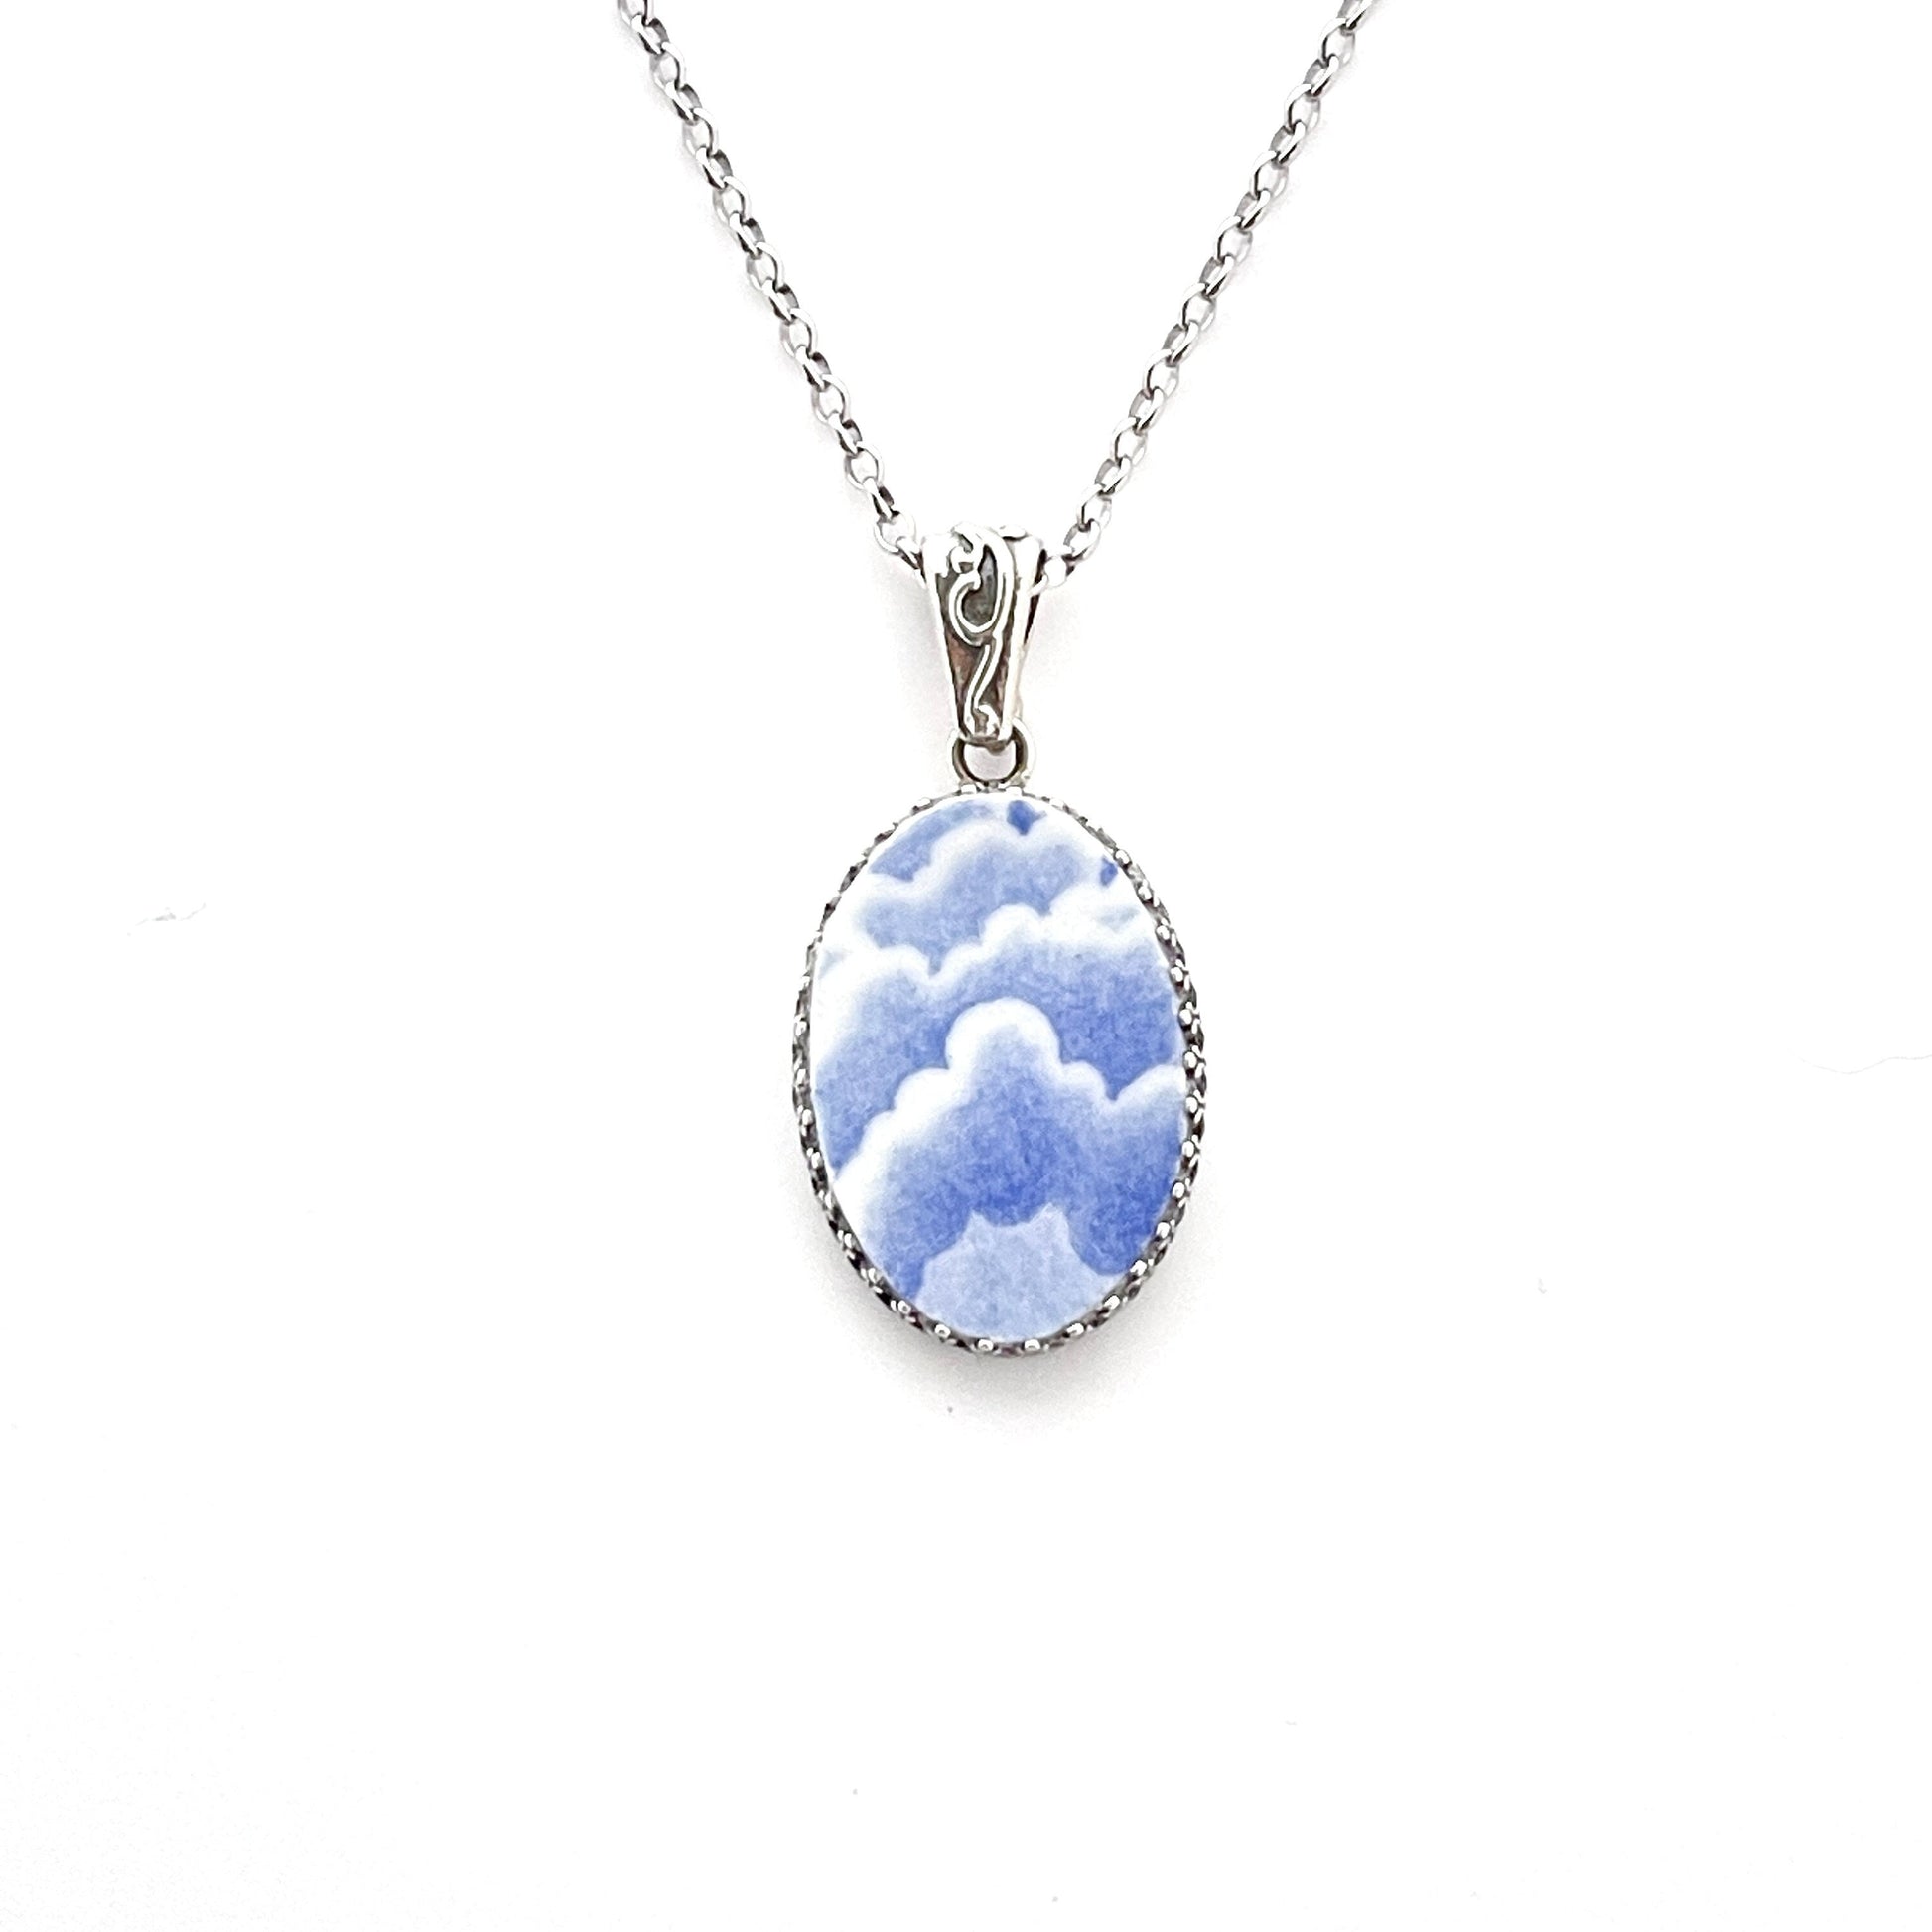 Blue and White Broken China Jewelry, Dream On Cloud Necklace, Unique 20th Anniversary Gift for Wife, Vintage China